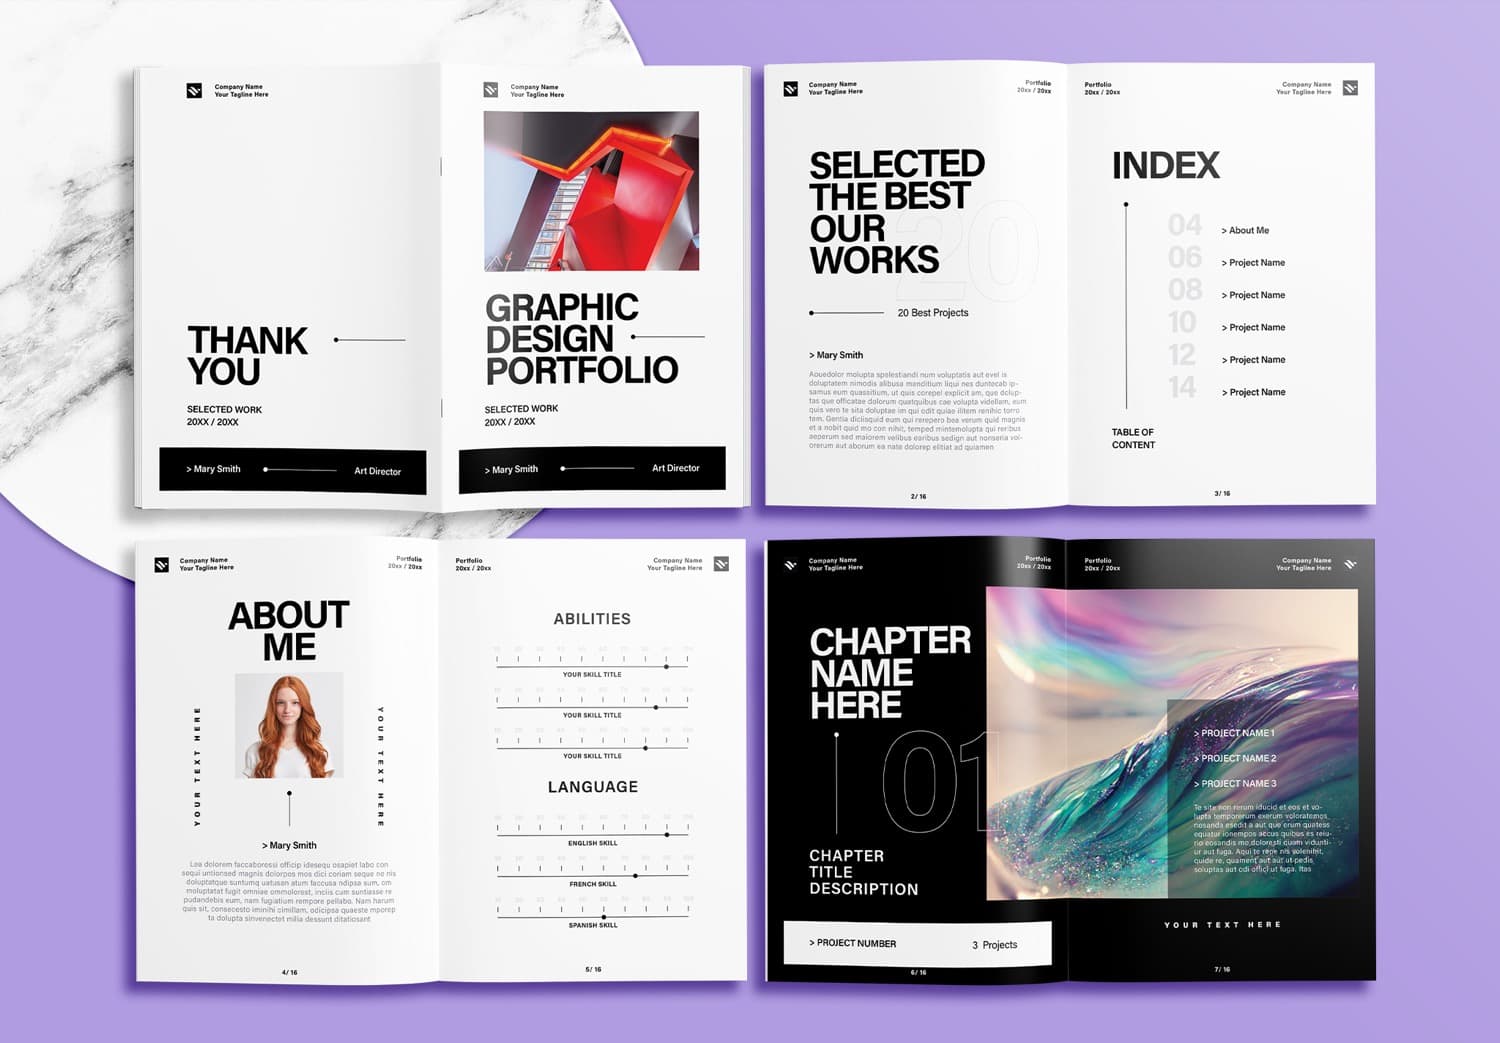 Free InDesign Modern Graphic Design Portfolio Layout Template with Black and Light Gray Accents